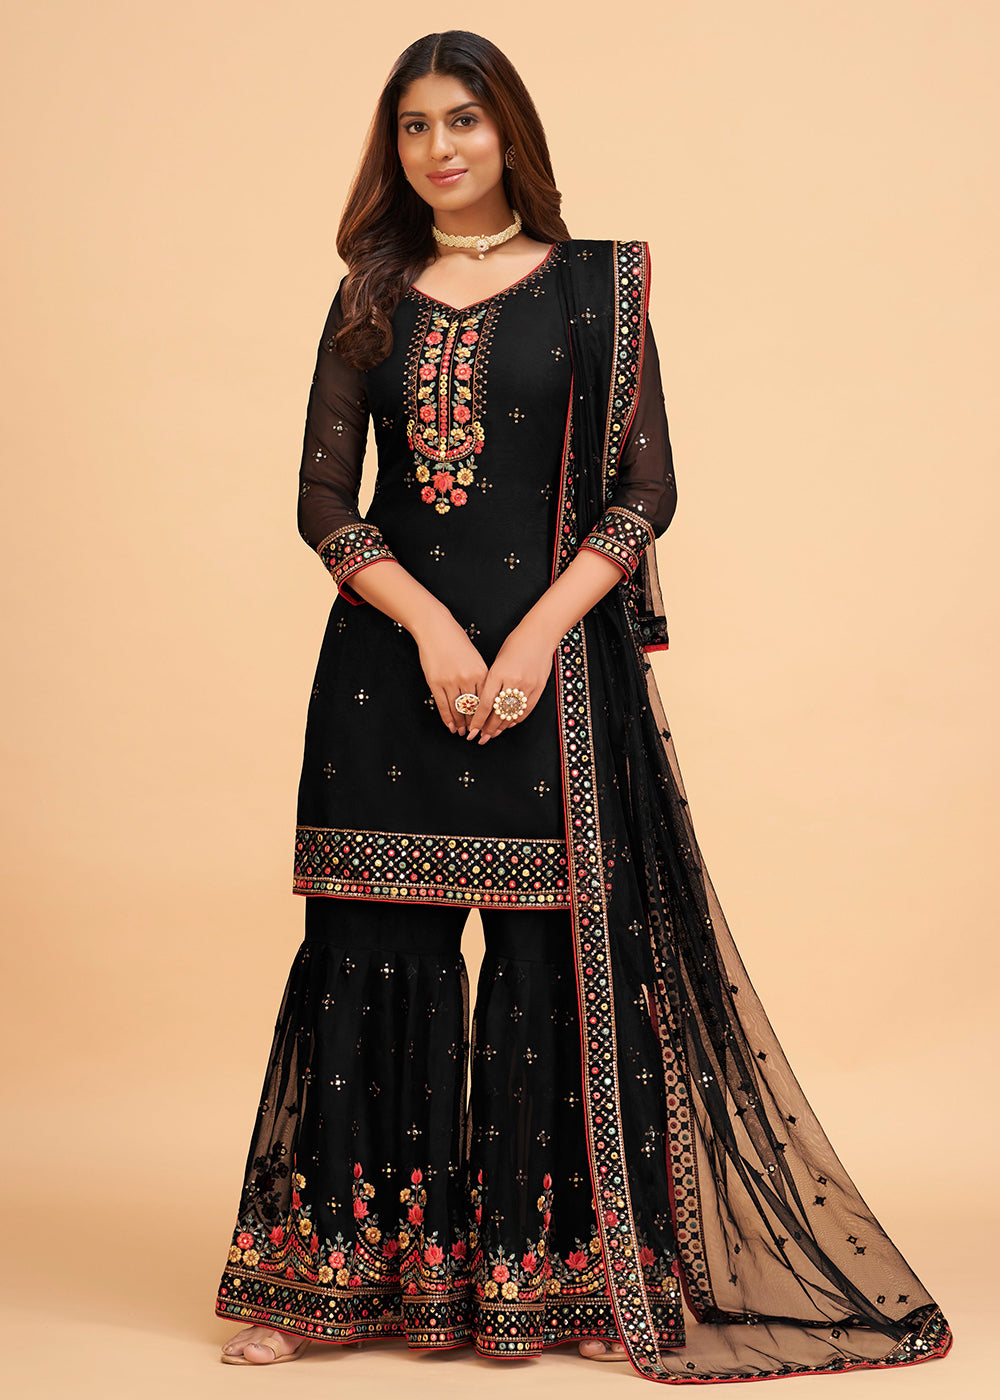 Shop Now Dazzling Black Wedding Embroidered Sharara Suit Online at Empress Clothing in USA, UK, Canada, Germany & Worldwide.